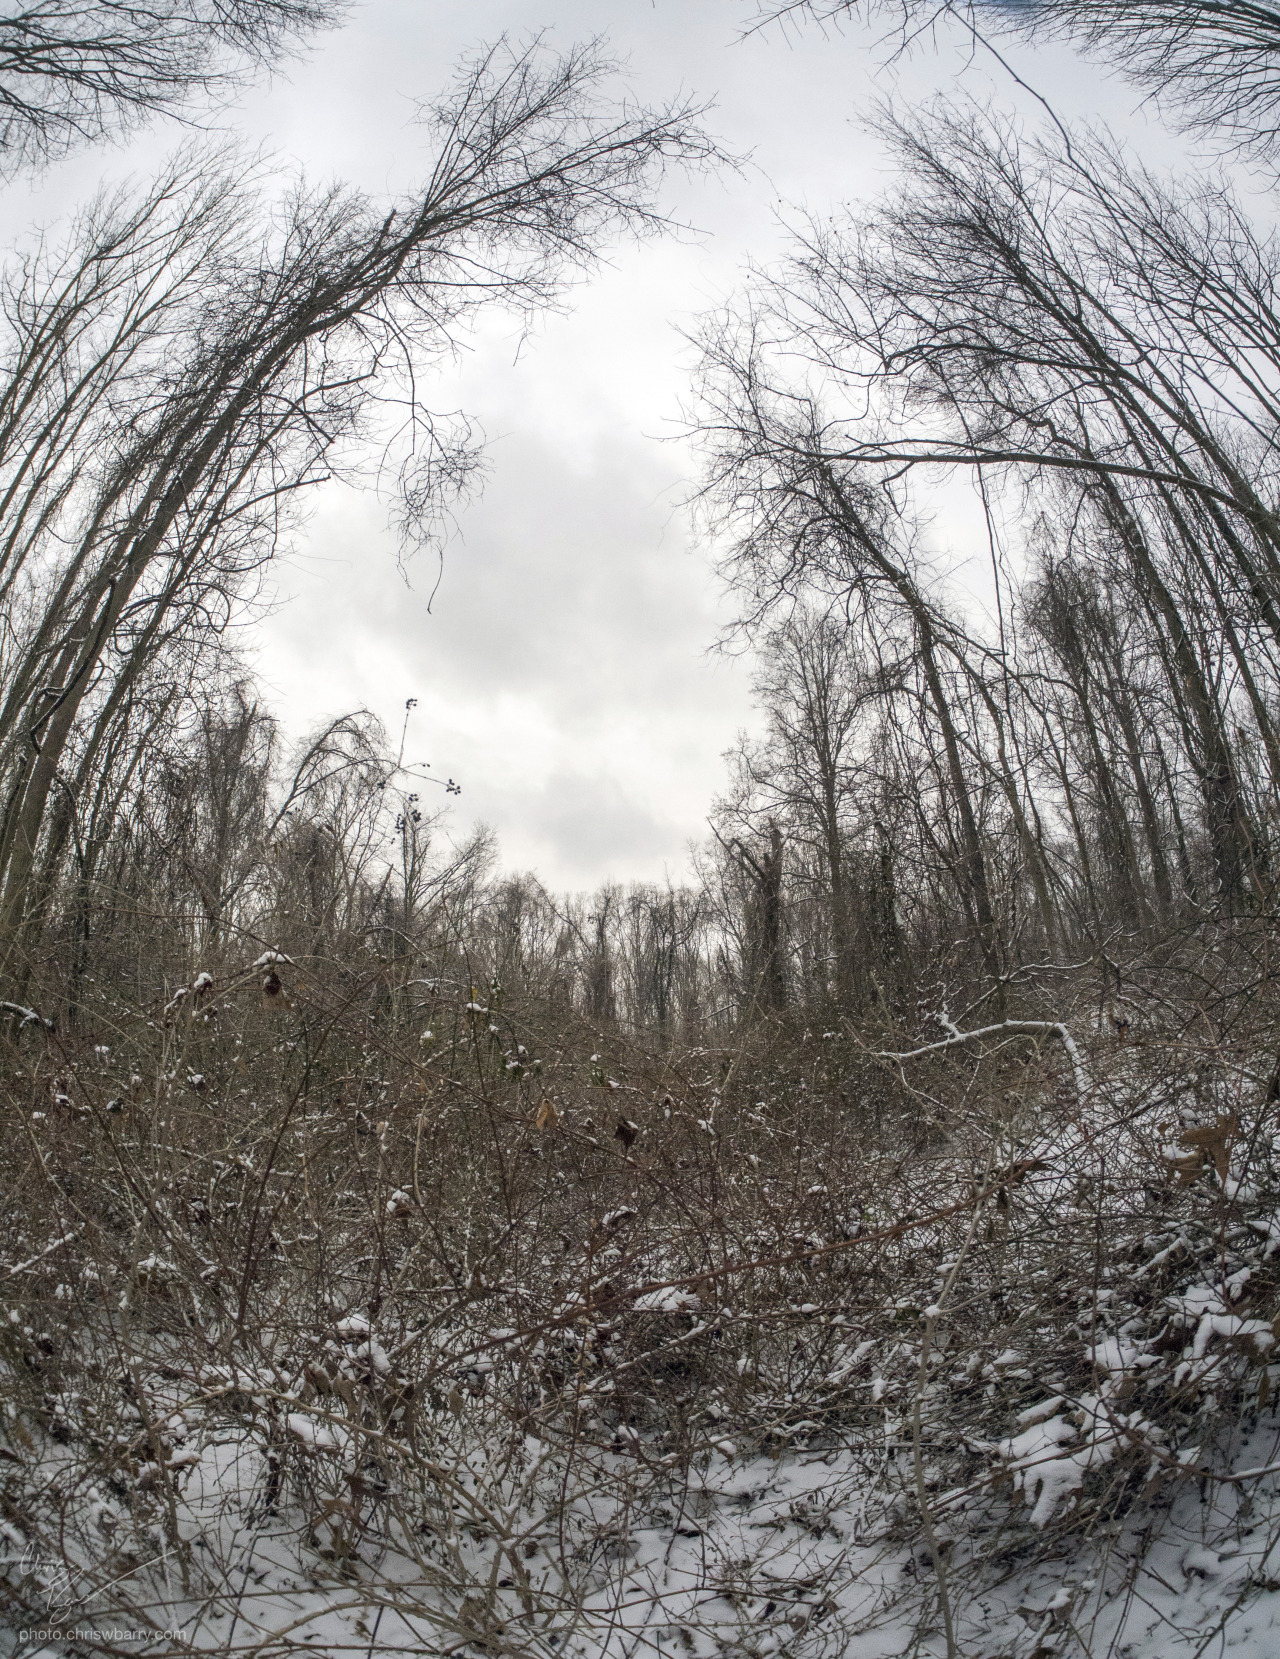 More fisheye because this lens is different and I have no idea how to use it